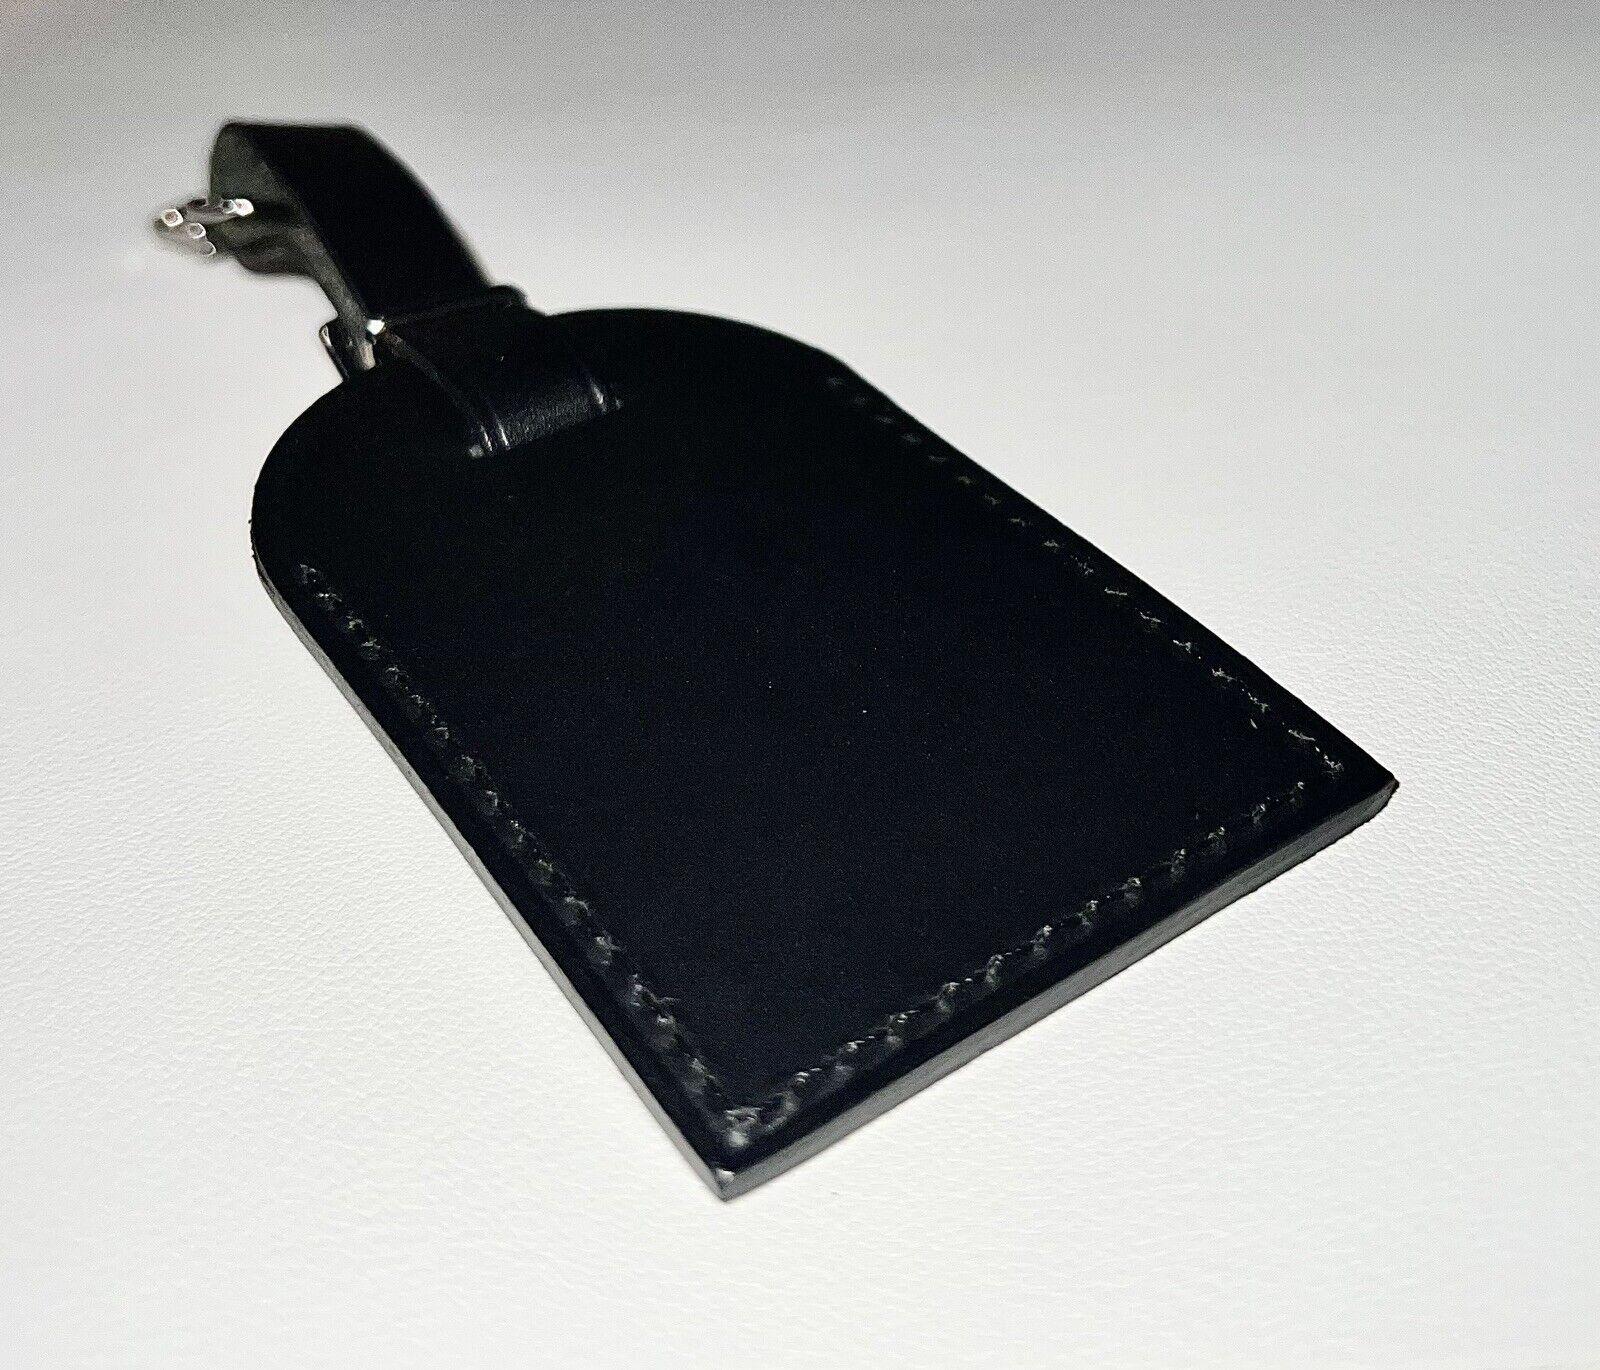 Louis Vuitton Luggage Tag w/ TF Initials Black Leather Silvertone  Buckle Large